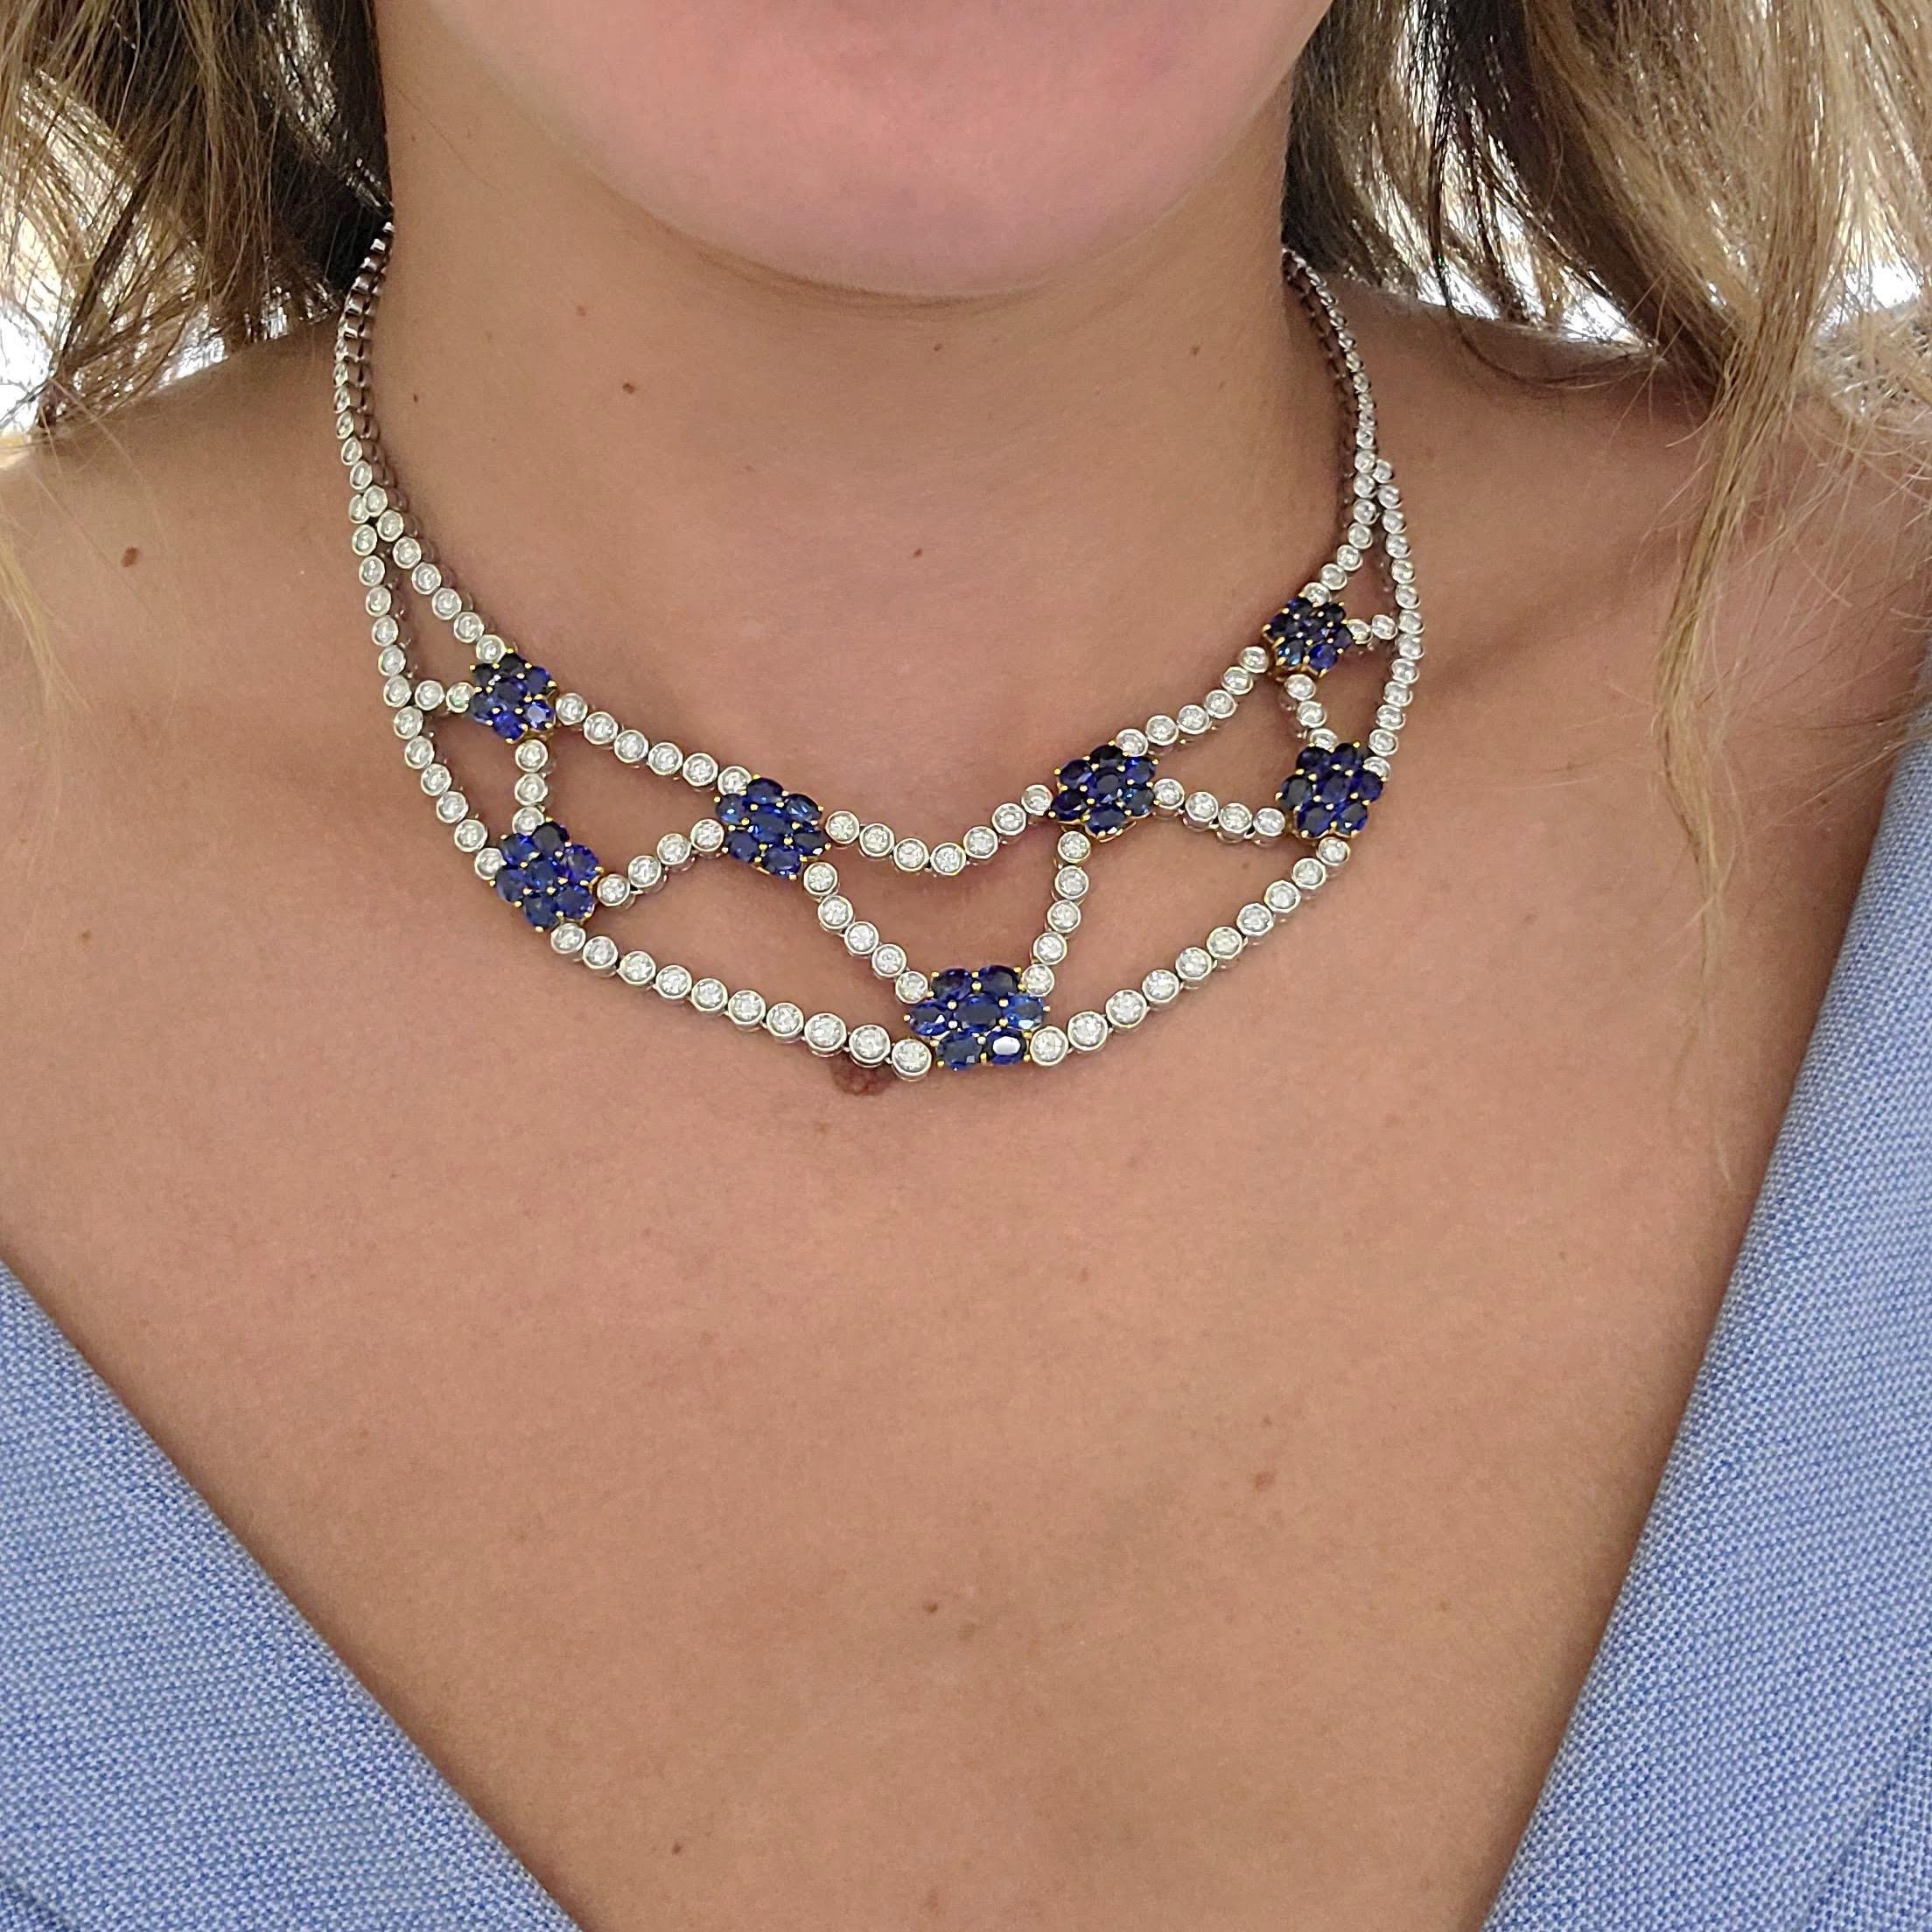 This necklace is designed with seven 18 karat yellow gold floral motifs , each set with seven oval Blue Sapphires. The necklace itself is bezel set round Brilliant Diamonds throughout, set in 18 karat white gold. The clasp at back is also another